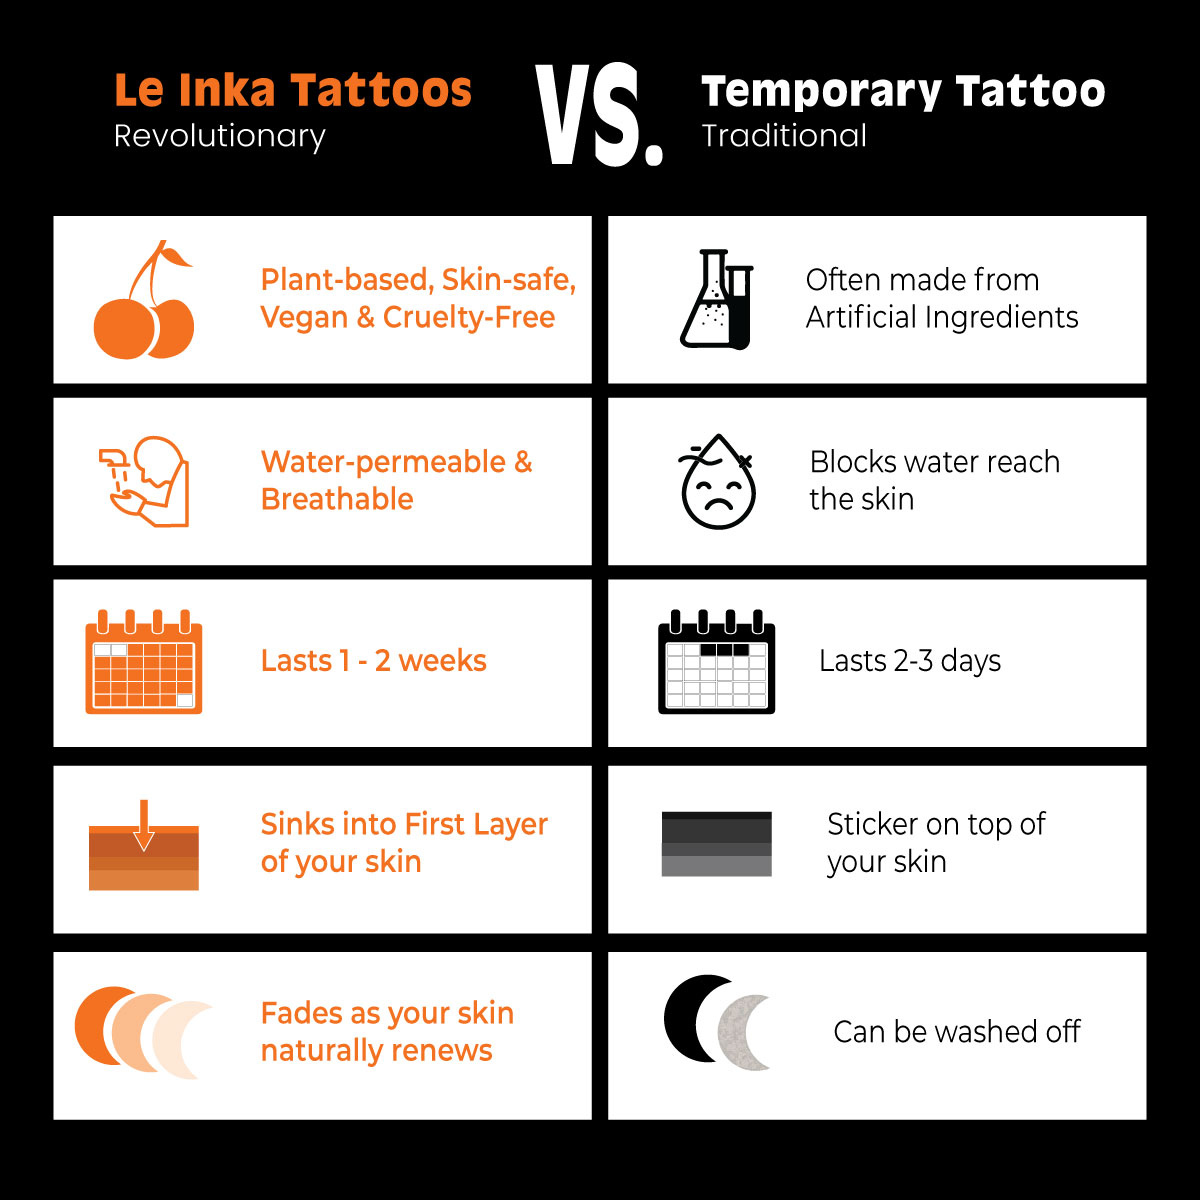 Le Inka Tattoos - Butterfly Collection